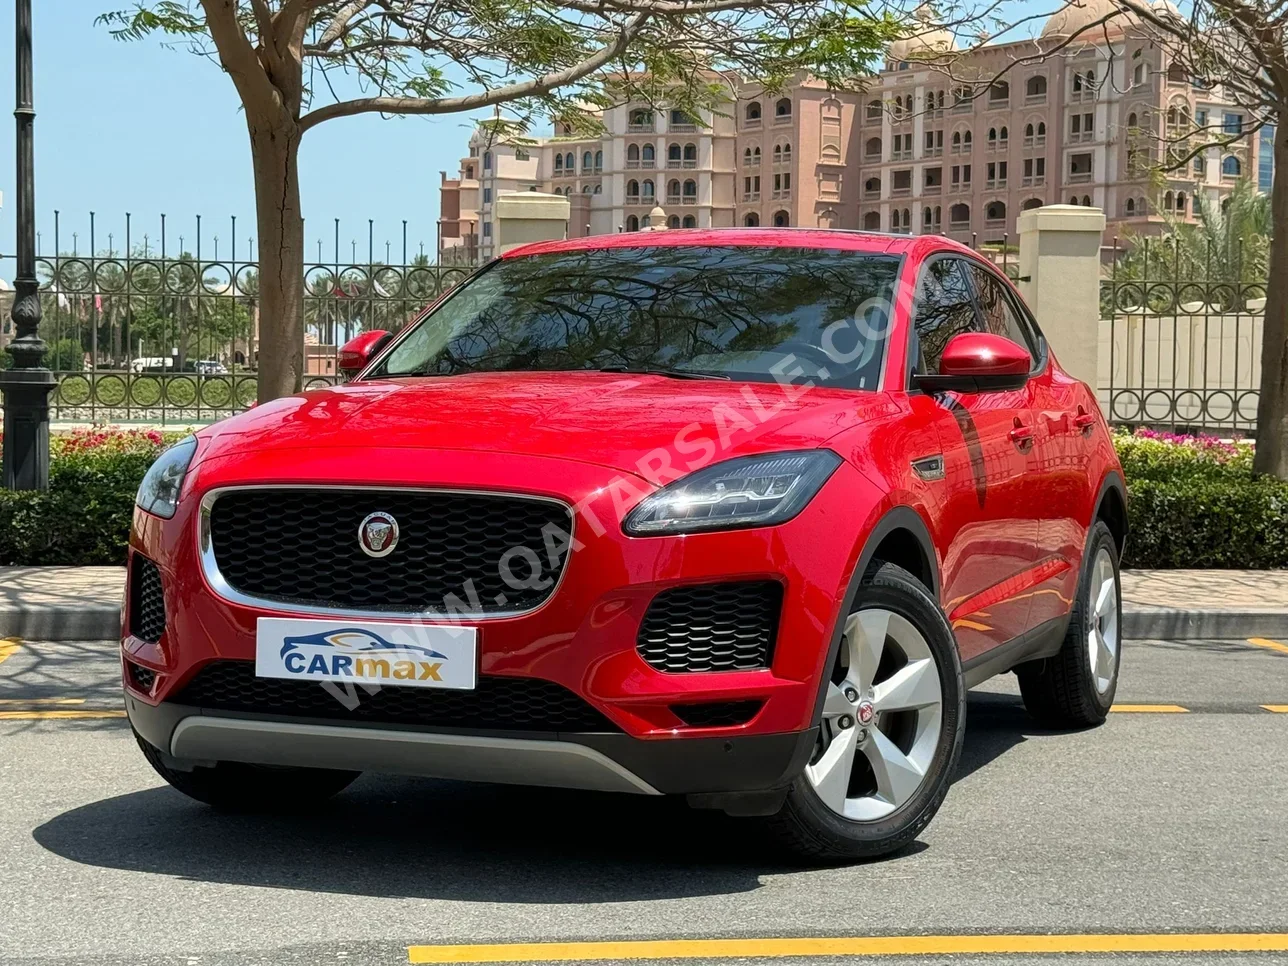 Jaguar  E-Pace  2020  Automatic  41,000 Km  4 Cylinder  Four Wheel Drive (4WD)  SUV  Red